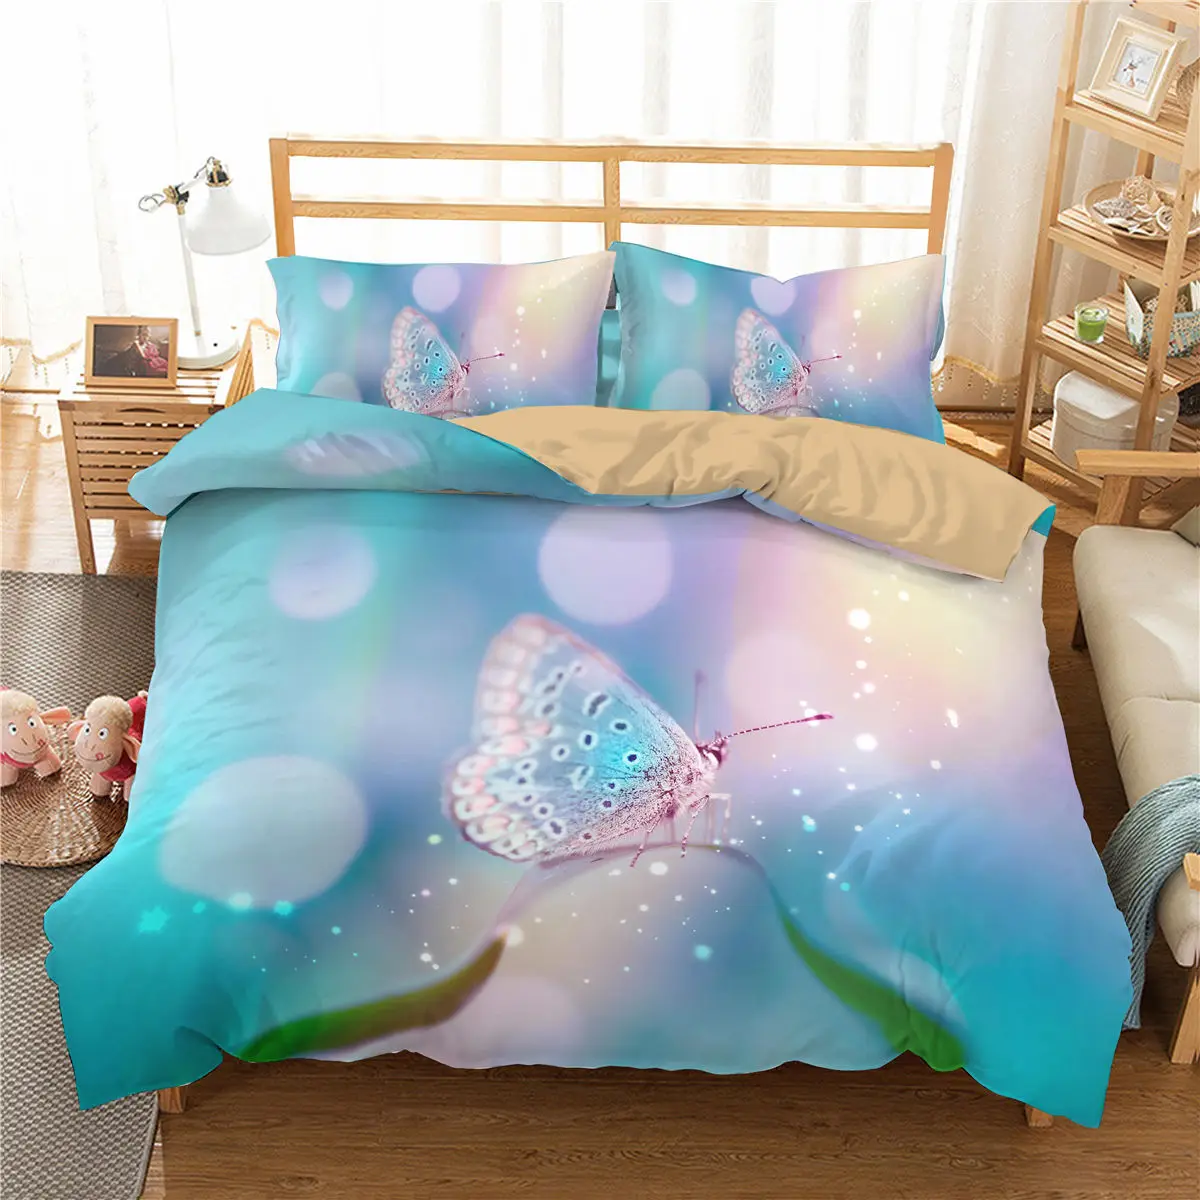 

Butterfly Duvet Cover Set King Size Pink Butterfly Peach Blossom Quilt Cover Microfiber Spring Fresh Theme Quilt Cover for Teen